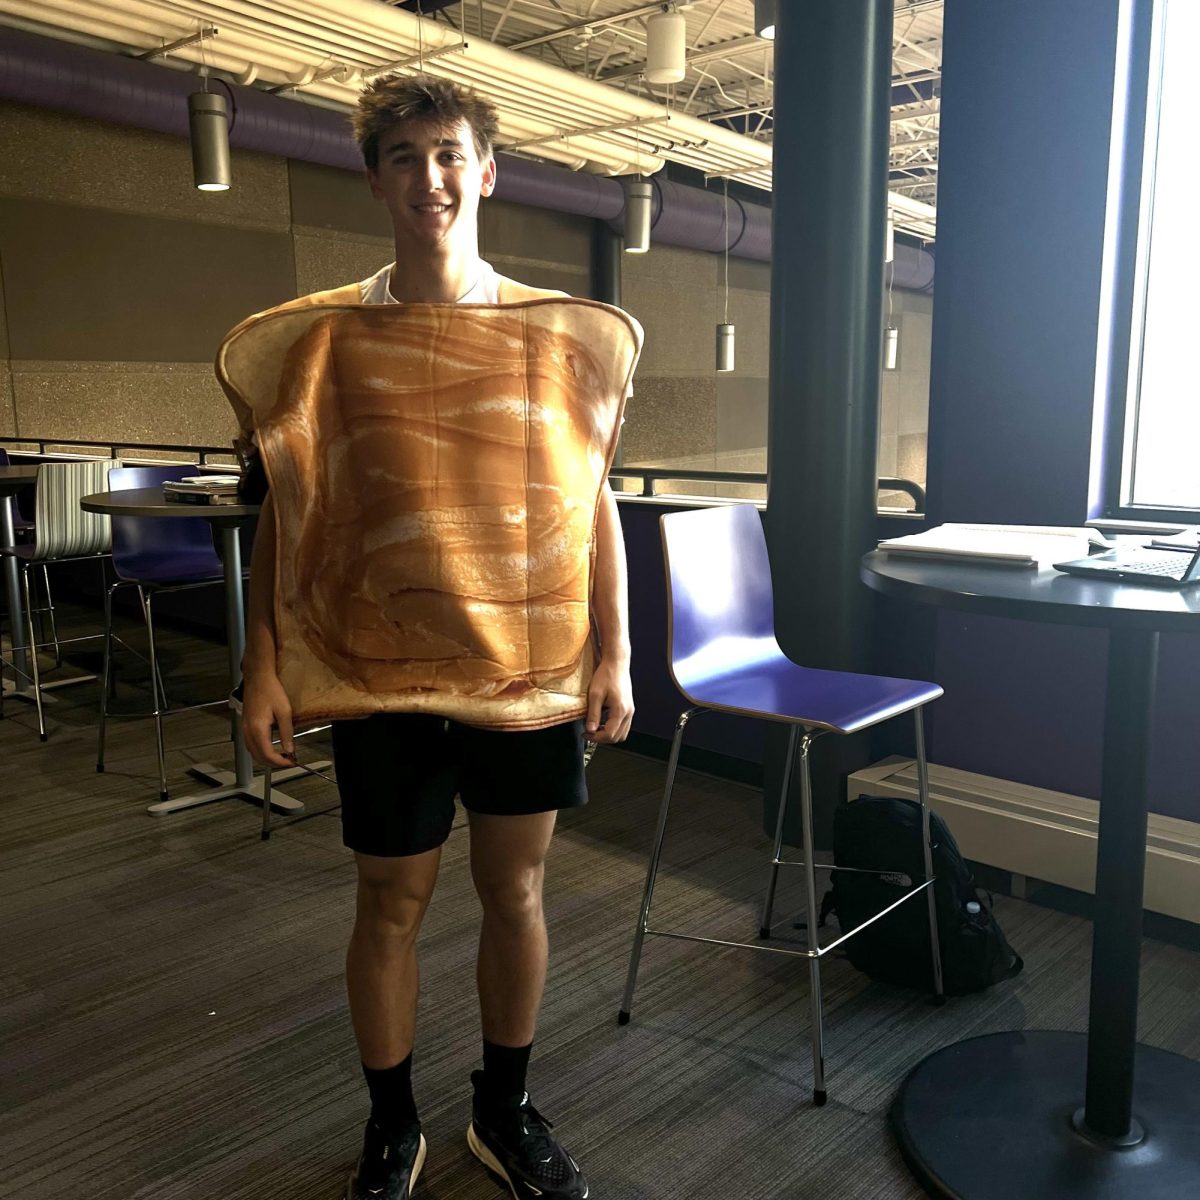 Easton Clark dressed as peanut butter for iconic duo day! but where did his jelly go?